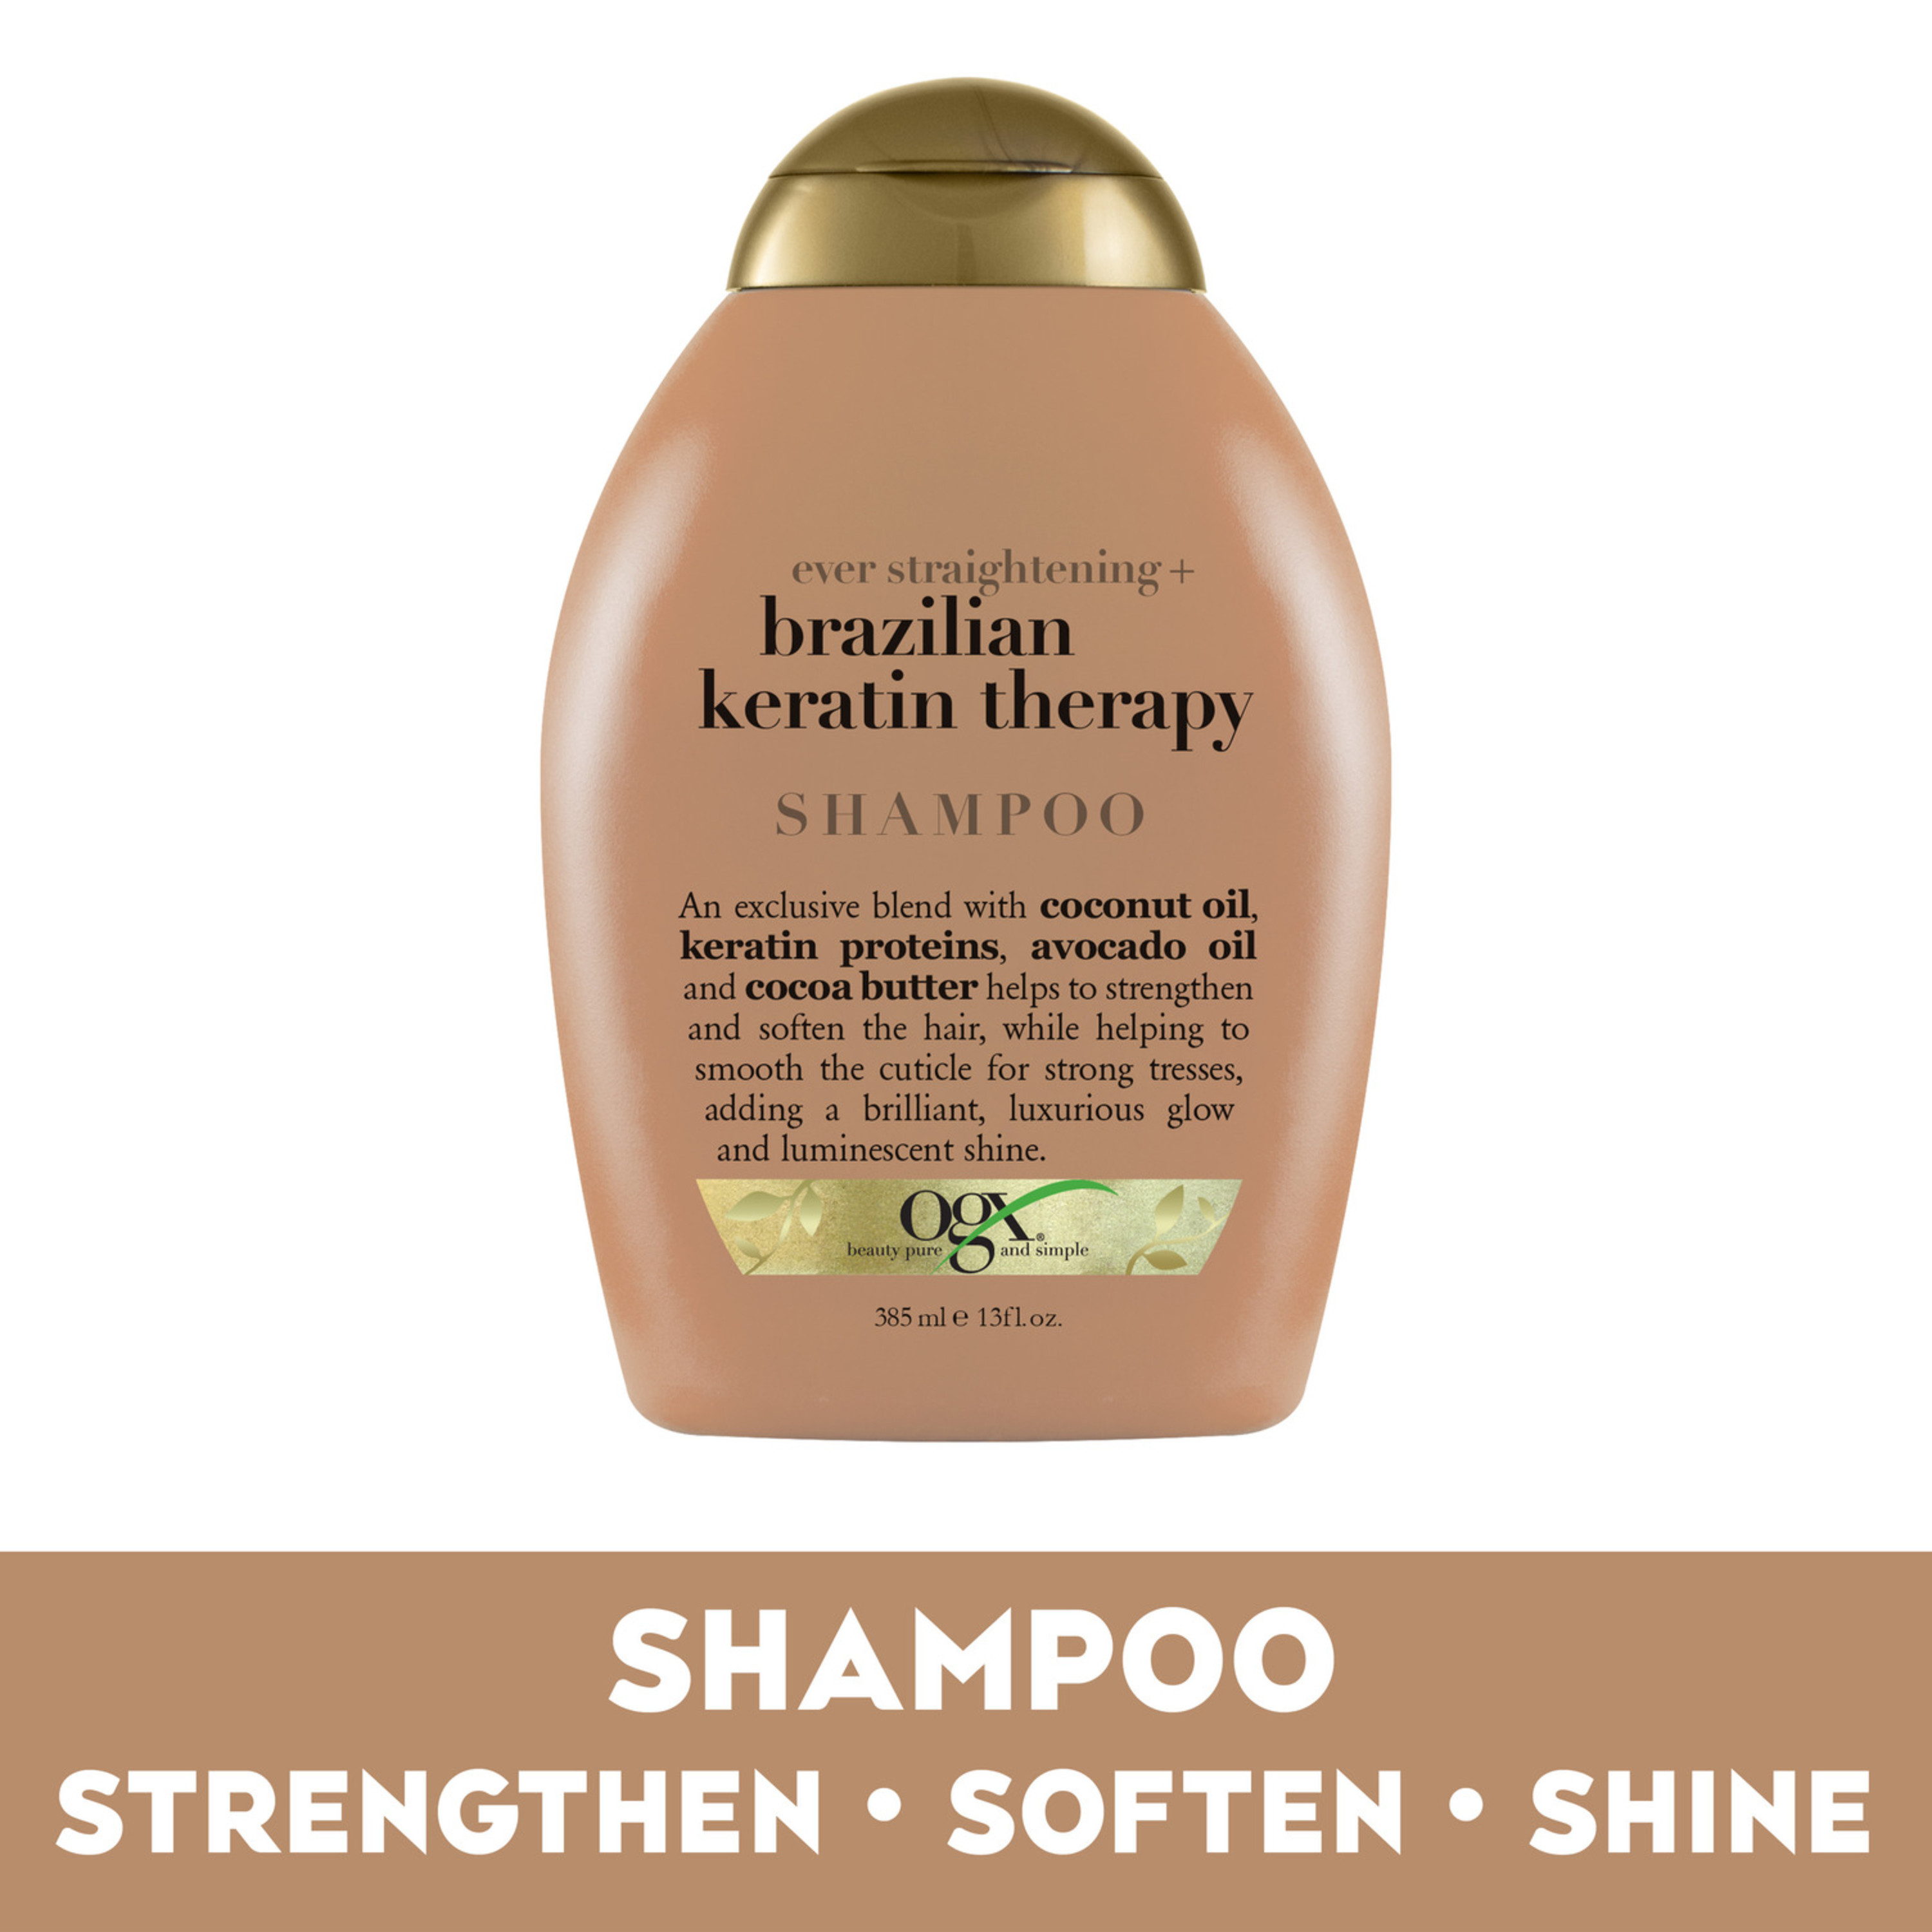 Ogx Ever Straightening Brazilian Keratin Therapy Smoothing Shampoo With Coconut Oil Cocoa Butter Avocado Oil For Lustrous Shiny Hair Paraben Free Sulfate Free Surfactants 13 Fl Oz Walmart Com Walmart Com